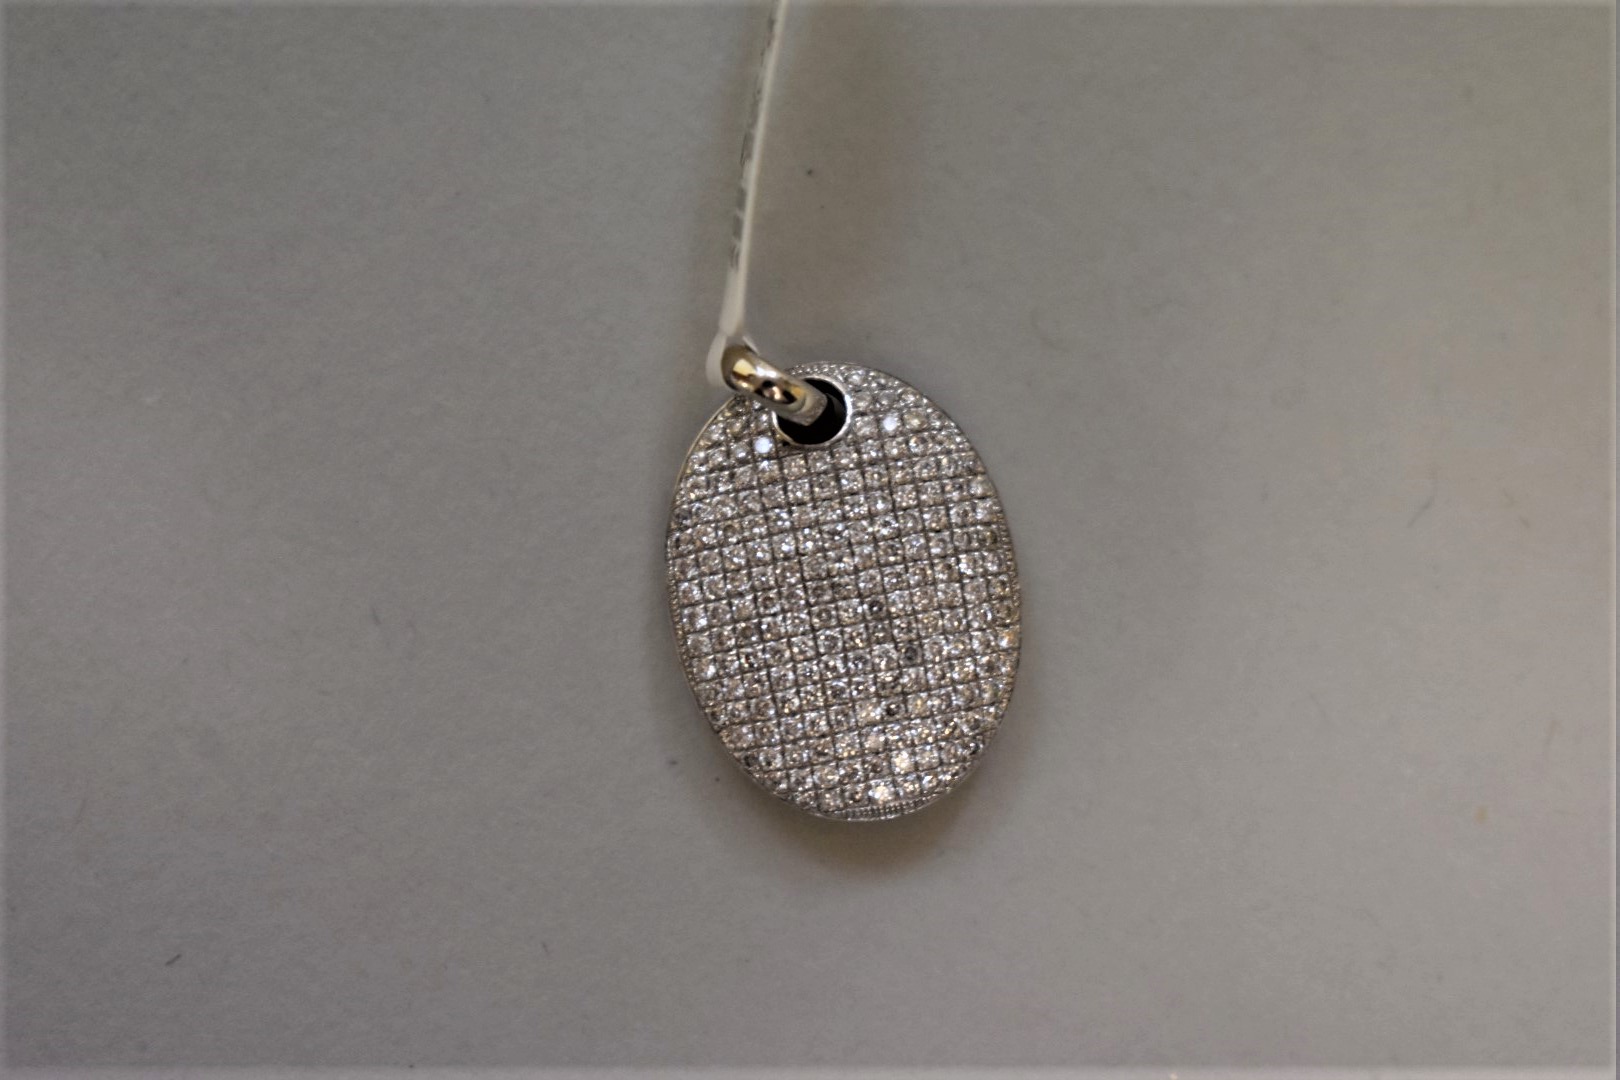 A diamond encrusted white gold pendant, stamped 750, set diamonds, 0.8ct approximately.